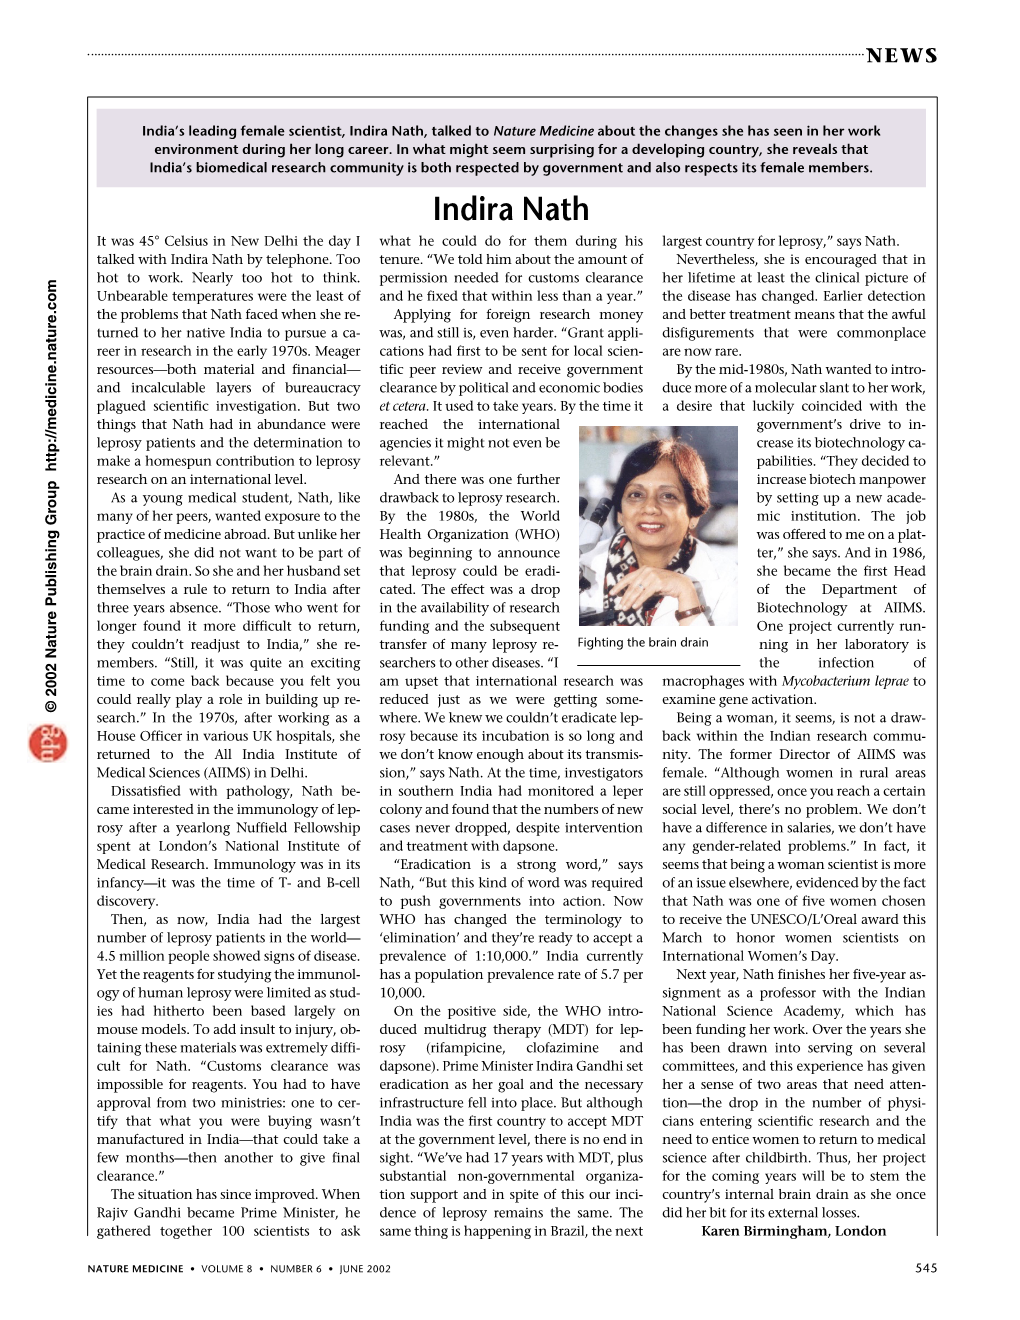 Indira Nath, Talked to Nature Medicine About the Changes She Has Seen in Her Work Environment During Her Long Career